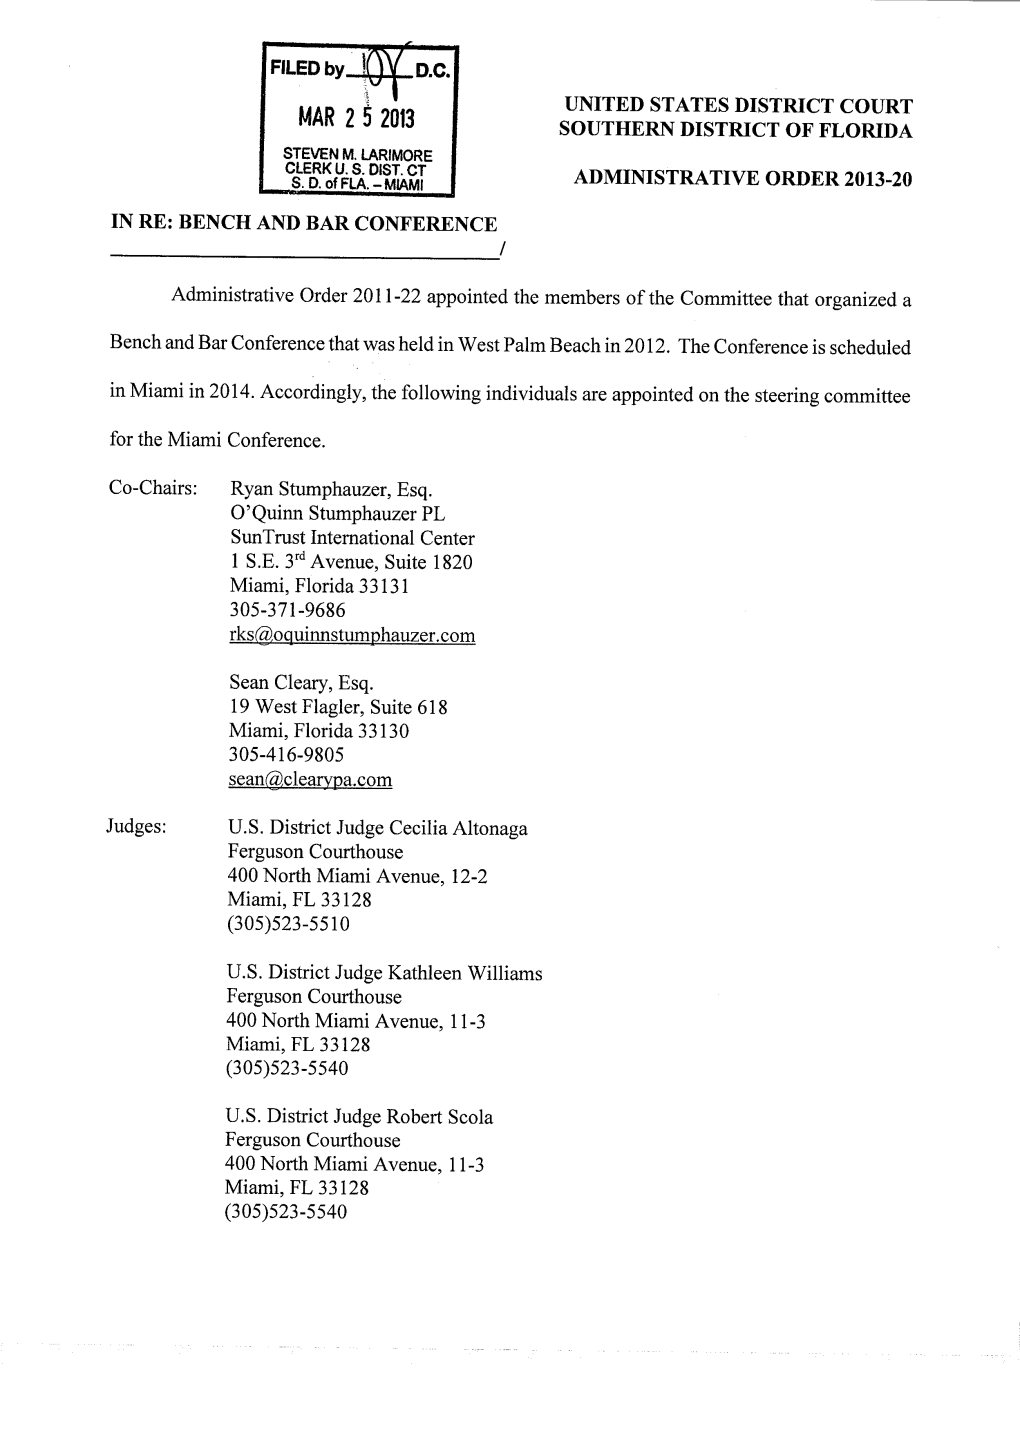 Administrative Order 2013-20 in Re Bench